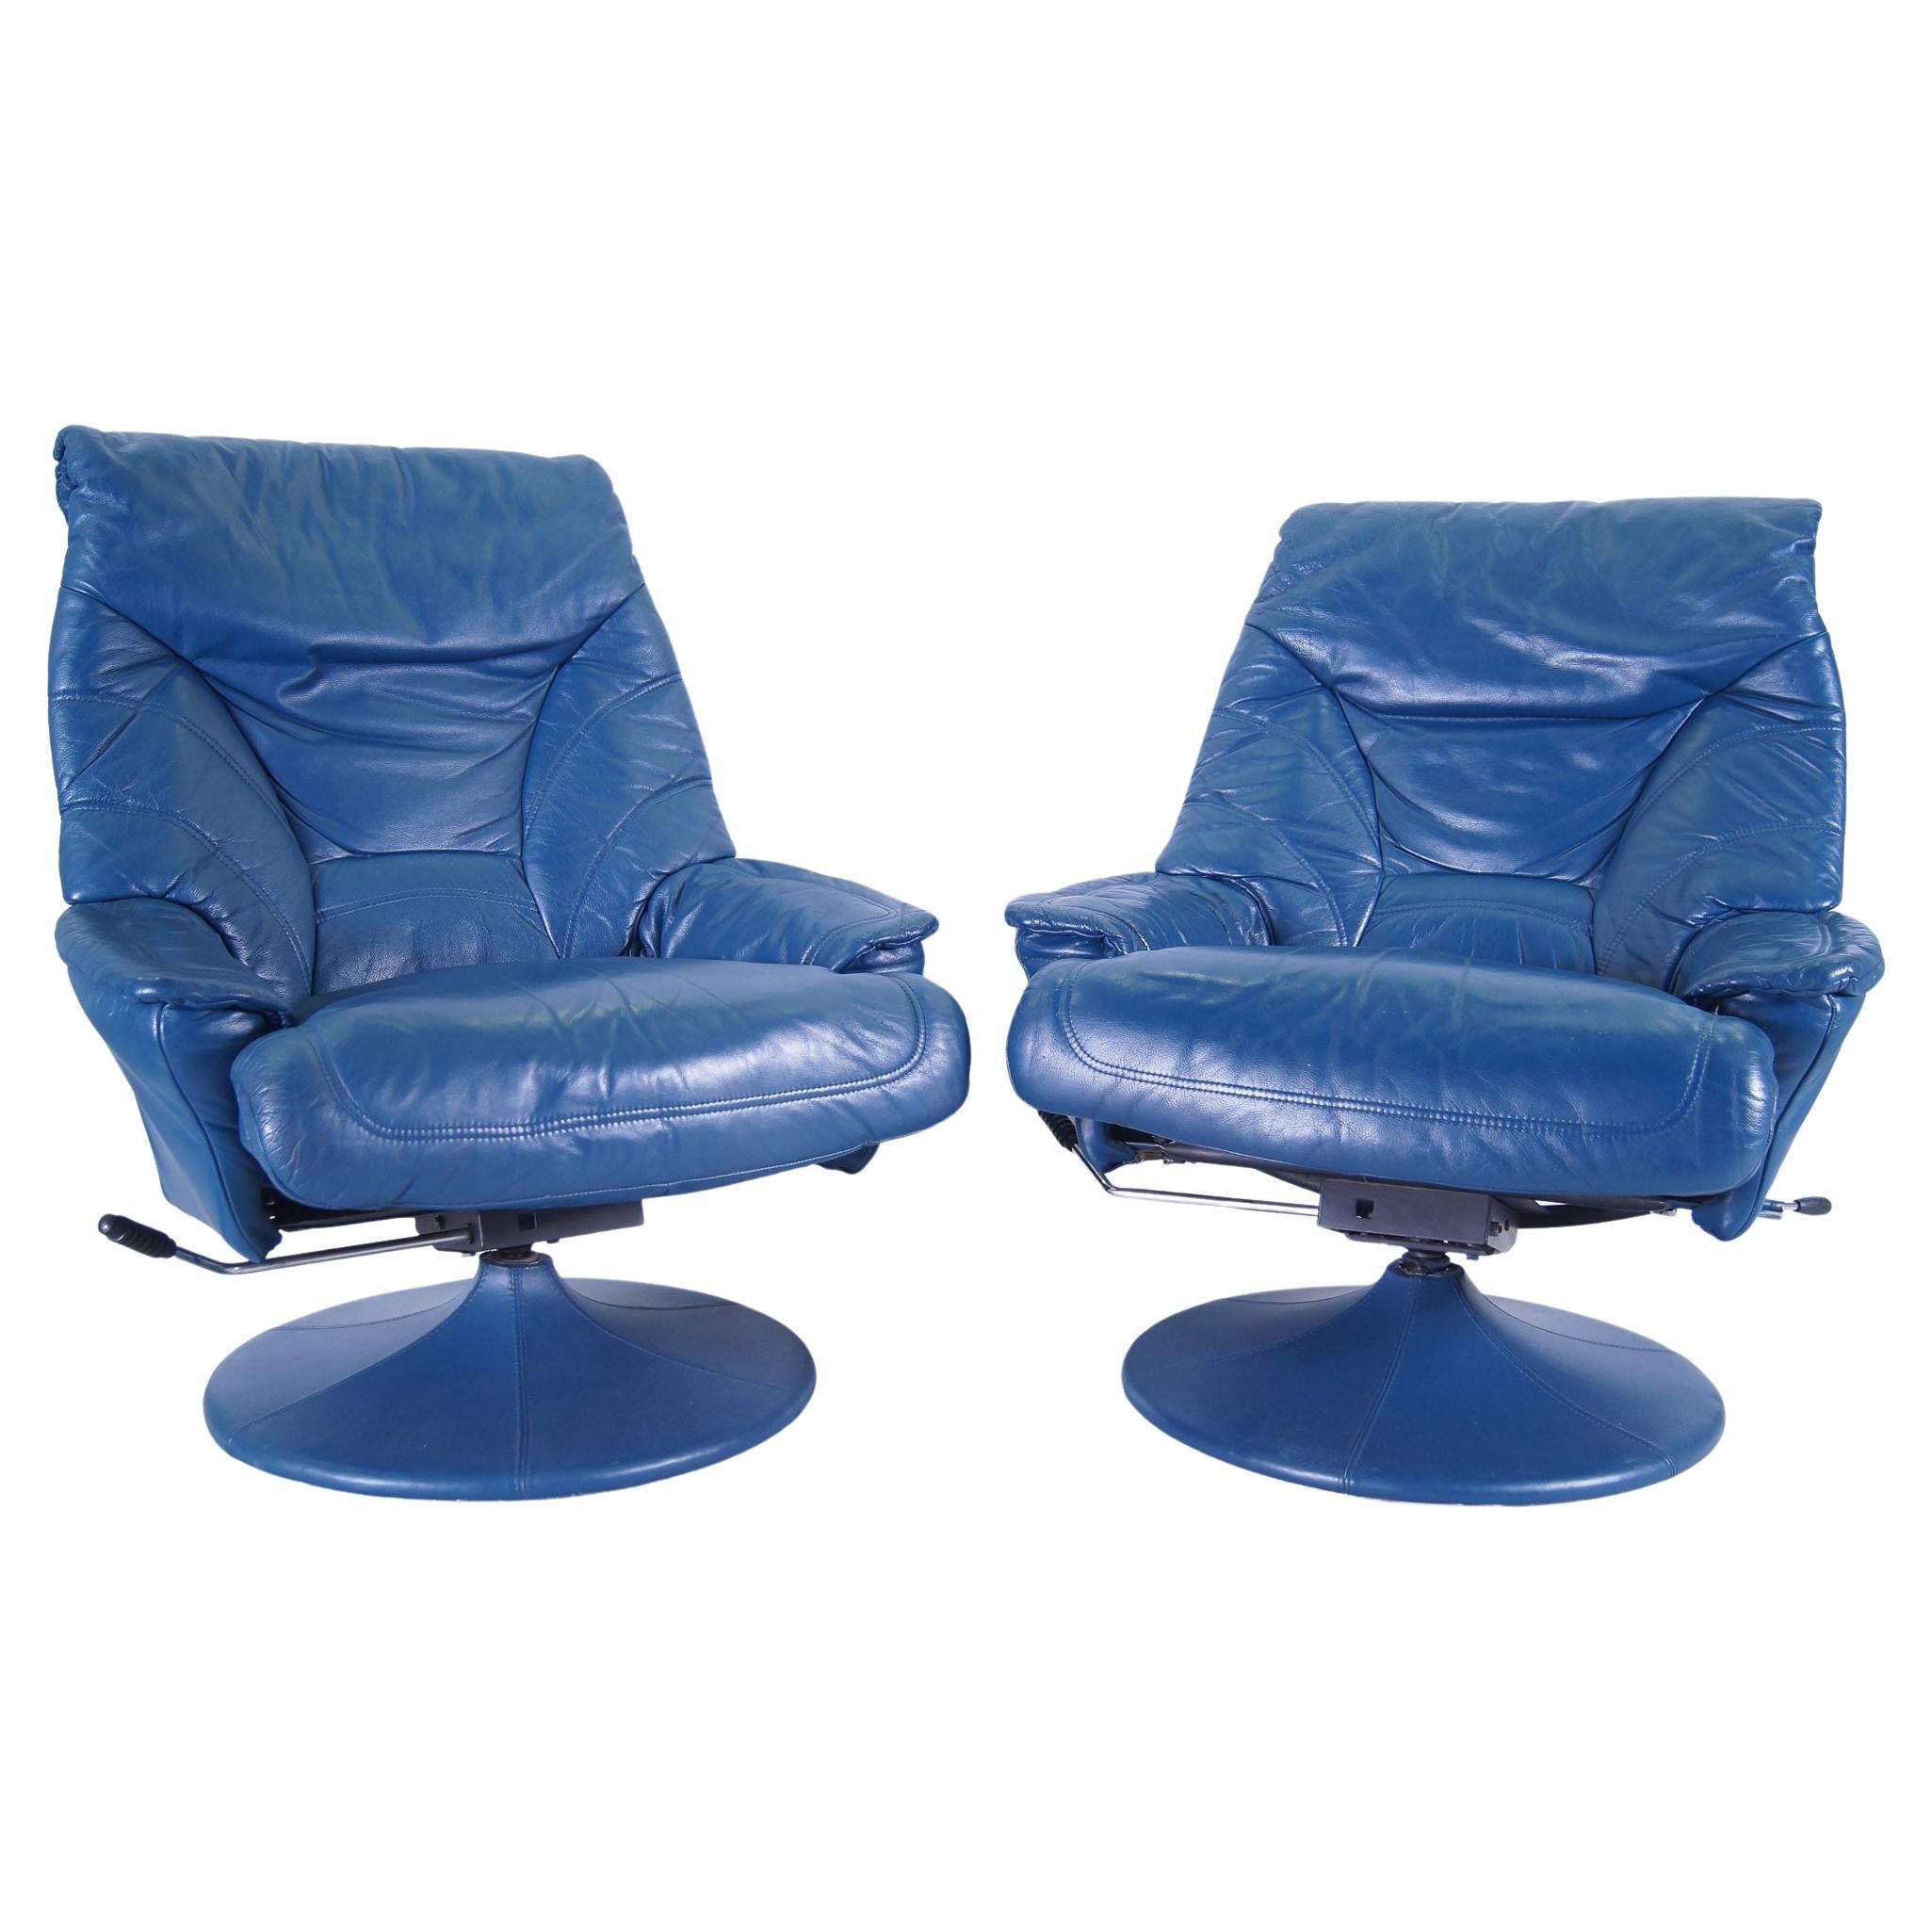 Blue Leather Recliners in the Style of Axel Enthoven, Set of 2